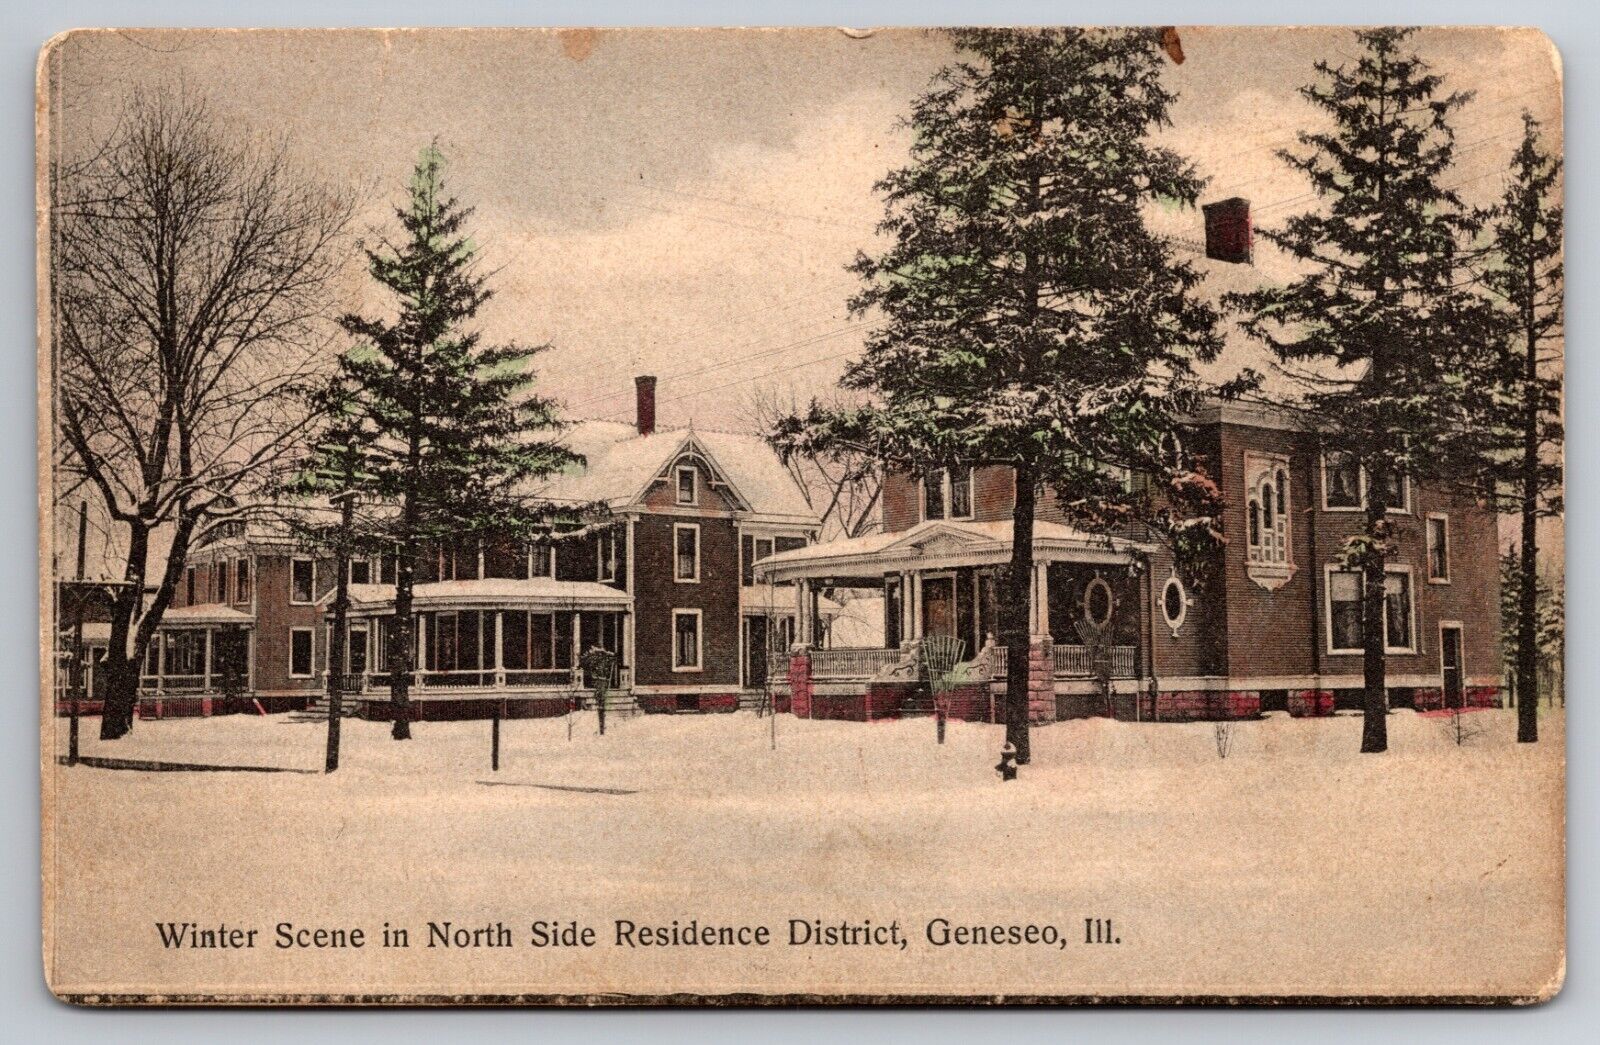 Winter Scene in North Side Residence District Geneseo Illinois IL 1908 Postcard